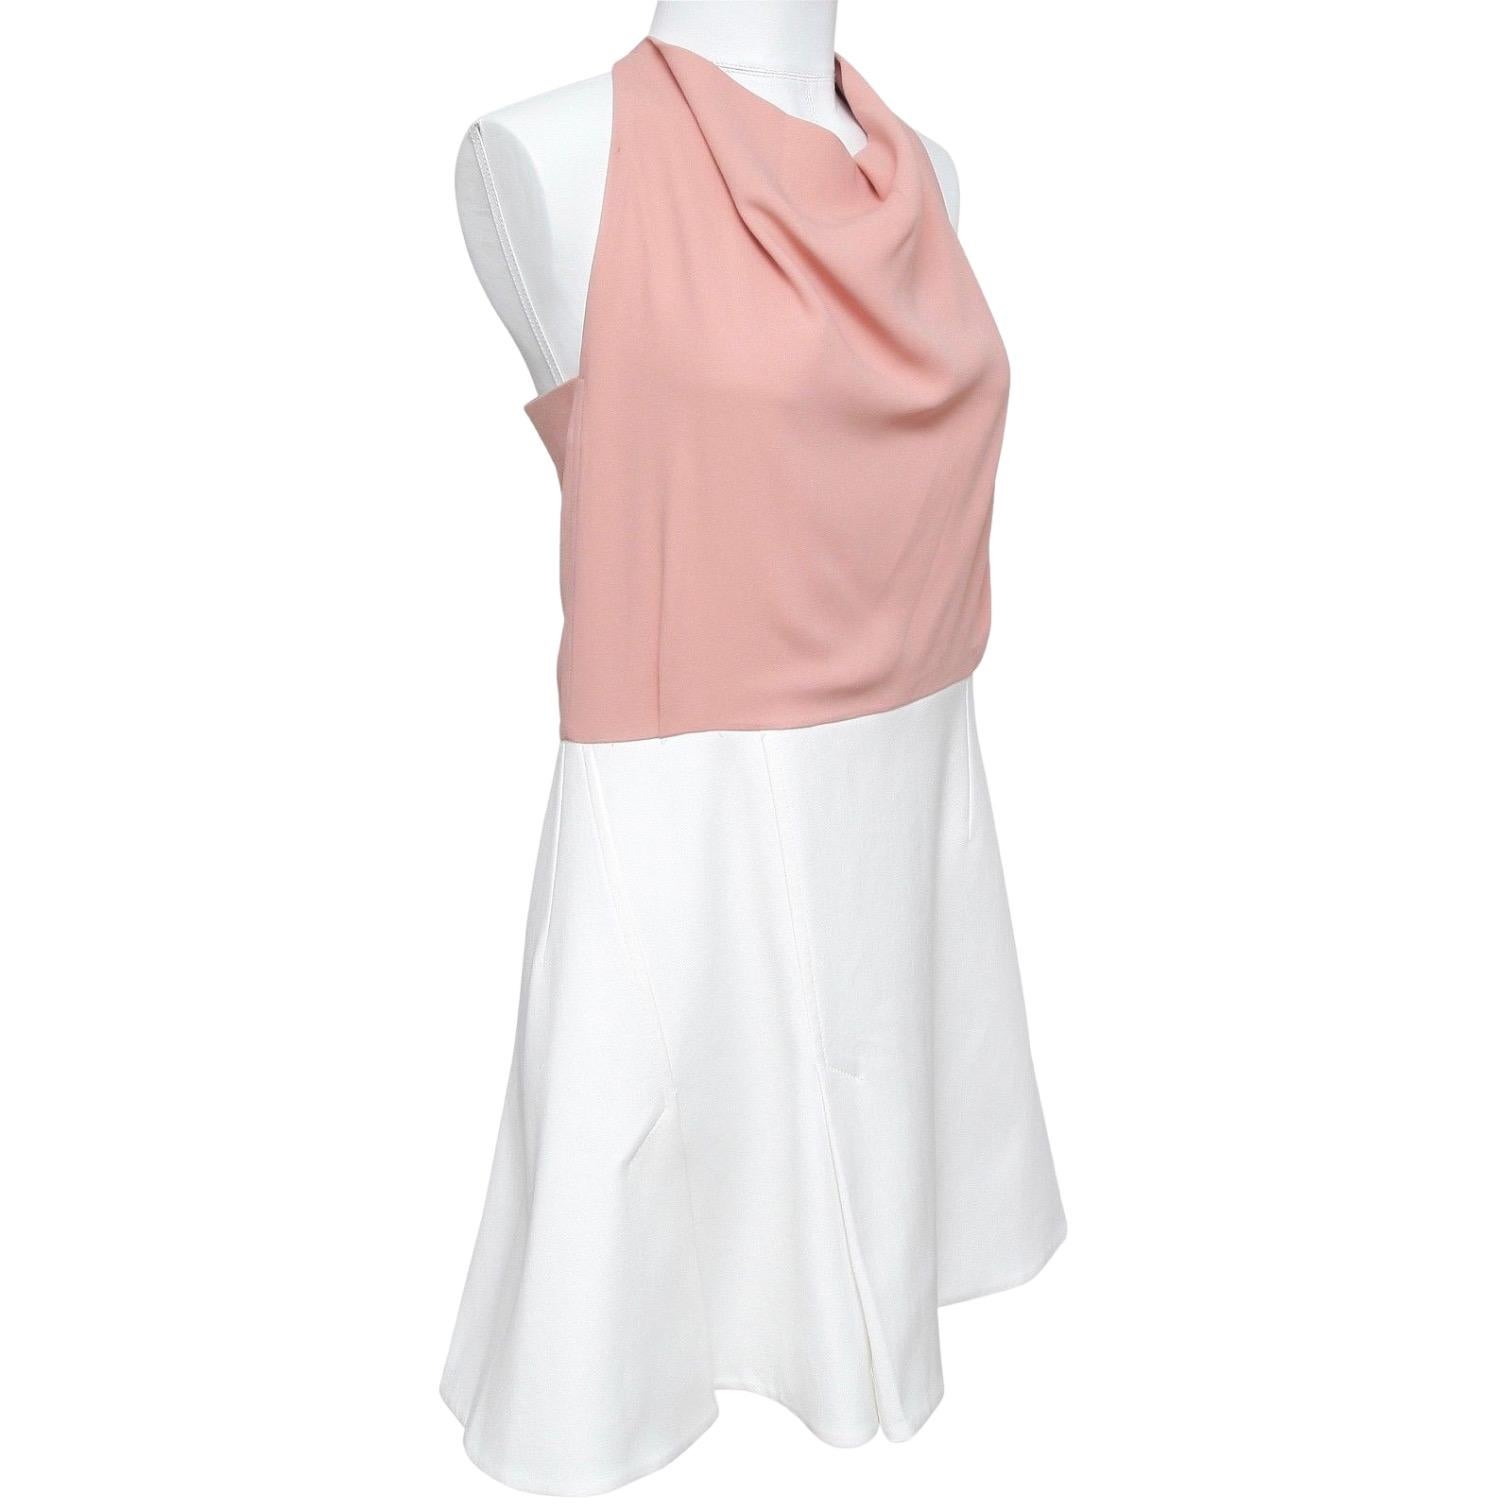 GUARANTEED AUTHENTIC ROLAND MOURET 2016 PAGET COWL NECK SLEEVELESS DRESS

Retail excluding taxes $1,230


Design:
- White and pale pink cowl neck sleeveless style dress.
- Cut-out upper back, exposed zipper closure.
- Lined.

Material:
- 60% Cotton,